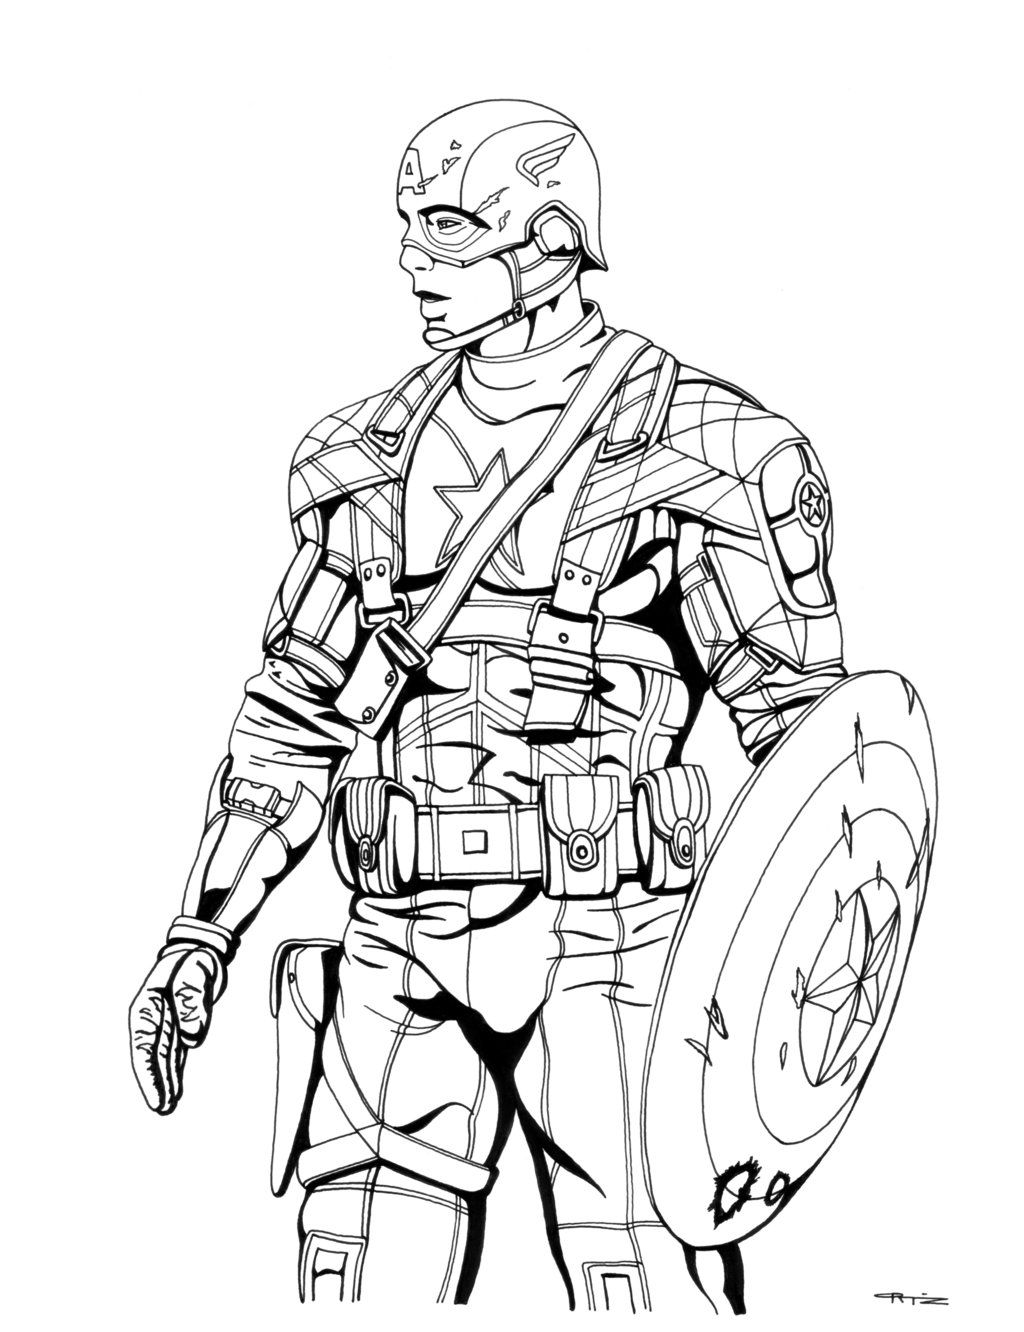 14 Pics of Captain America Vs Iron Man Coloring Pages - Captain ...